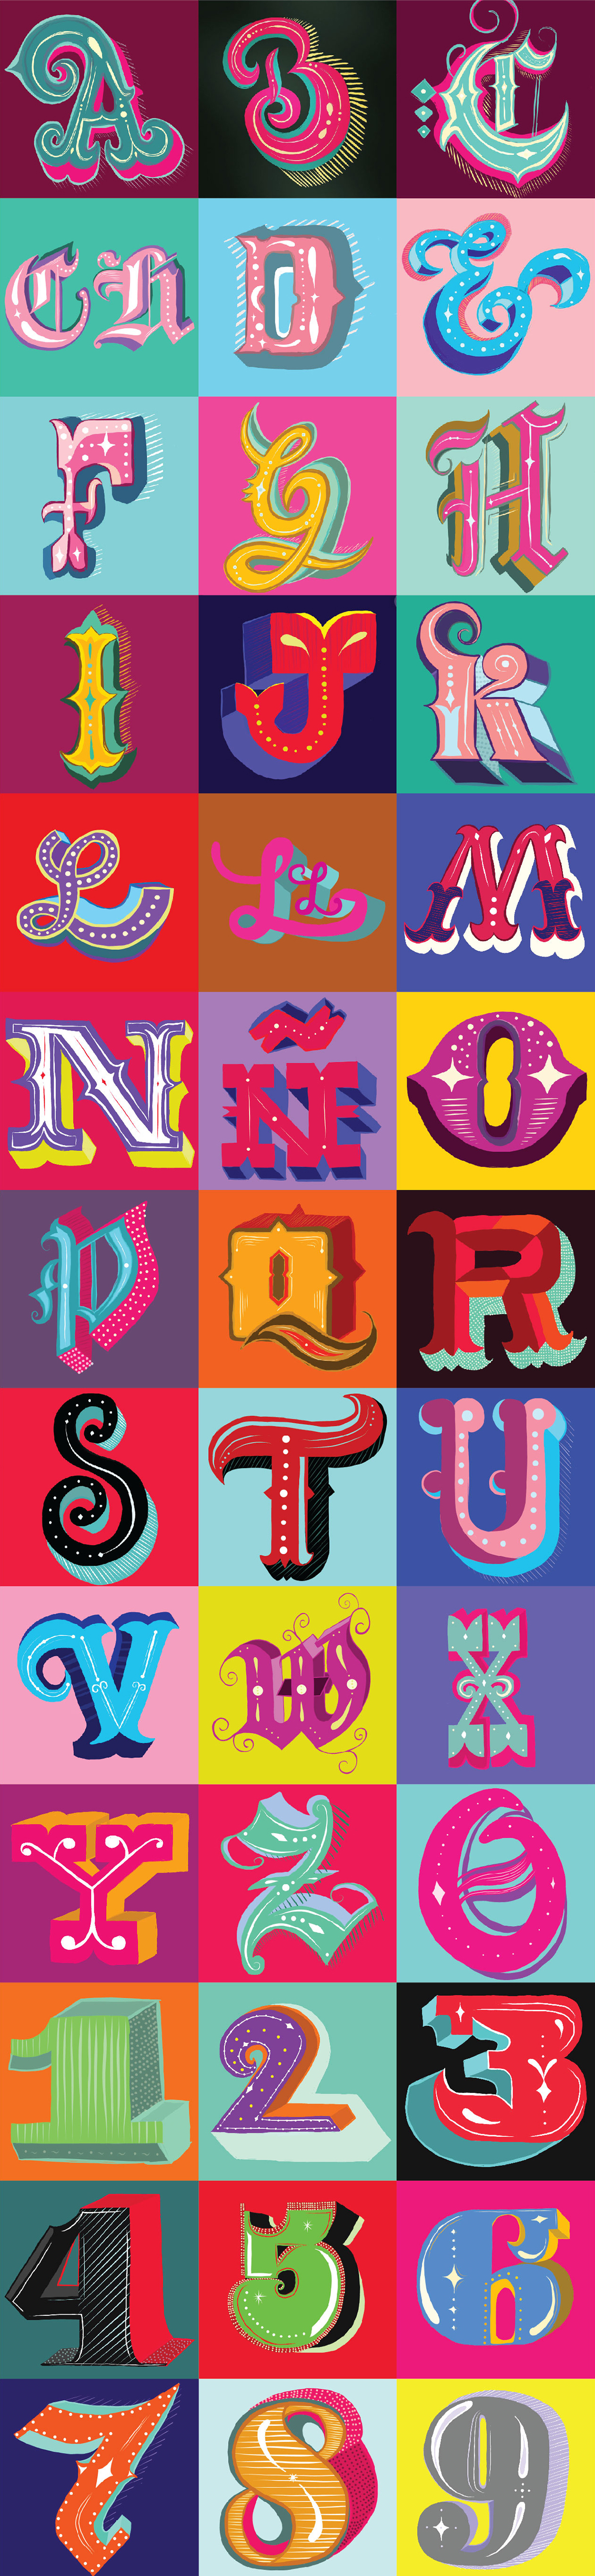 type letters adobedraw anitaembrollos doodles